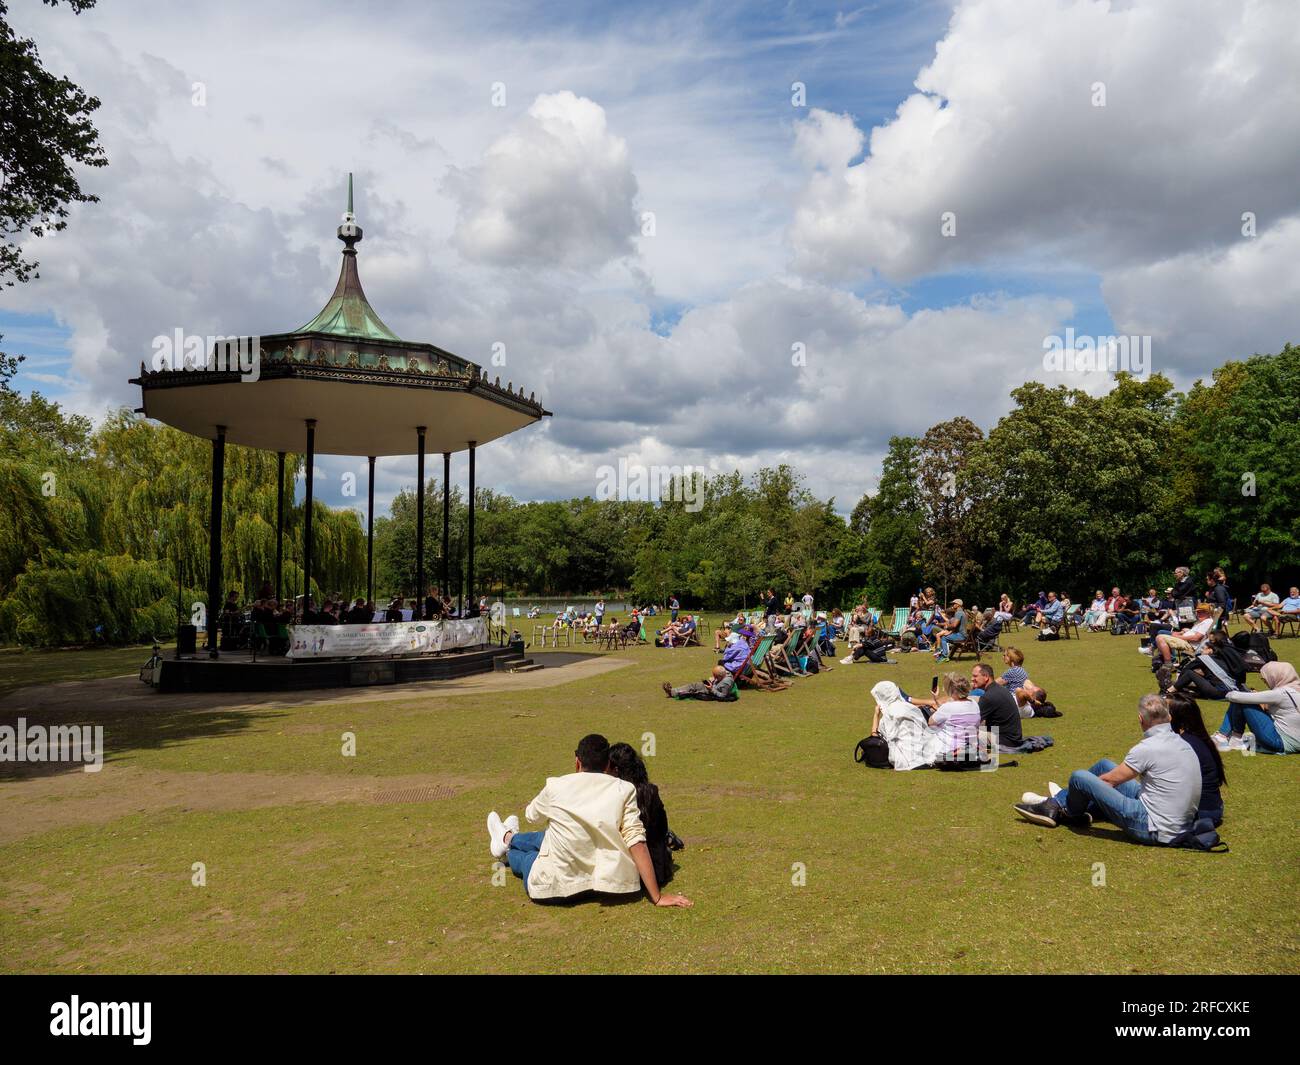 People listening to the music at a bandstand in Regent’s Park, London UK Stock Photo